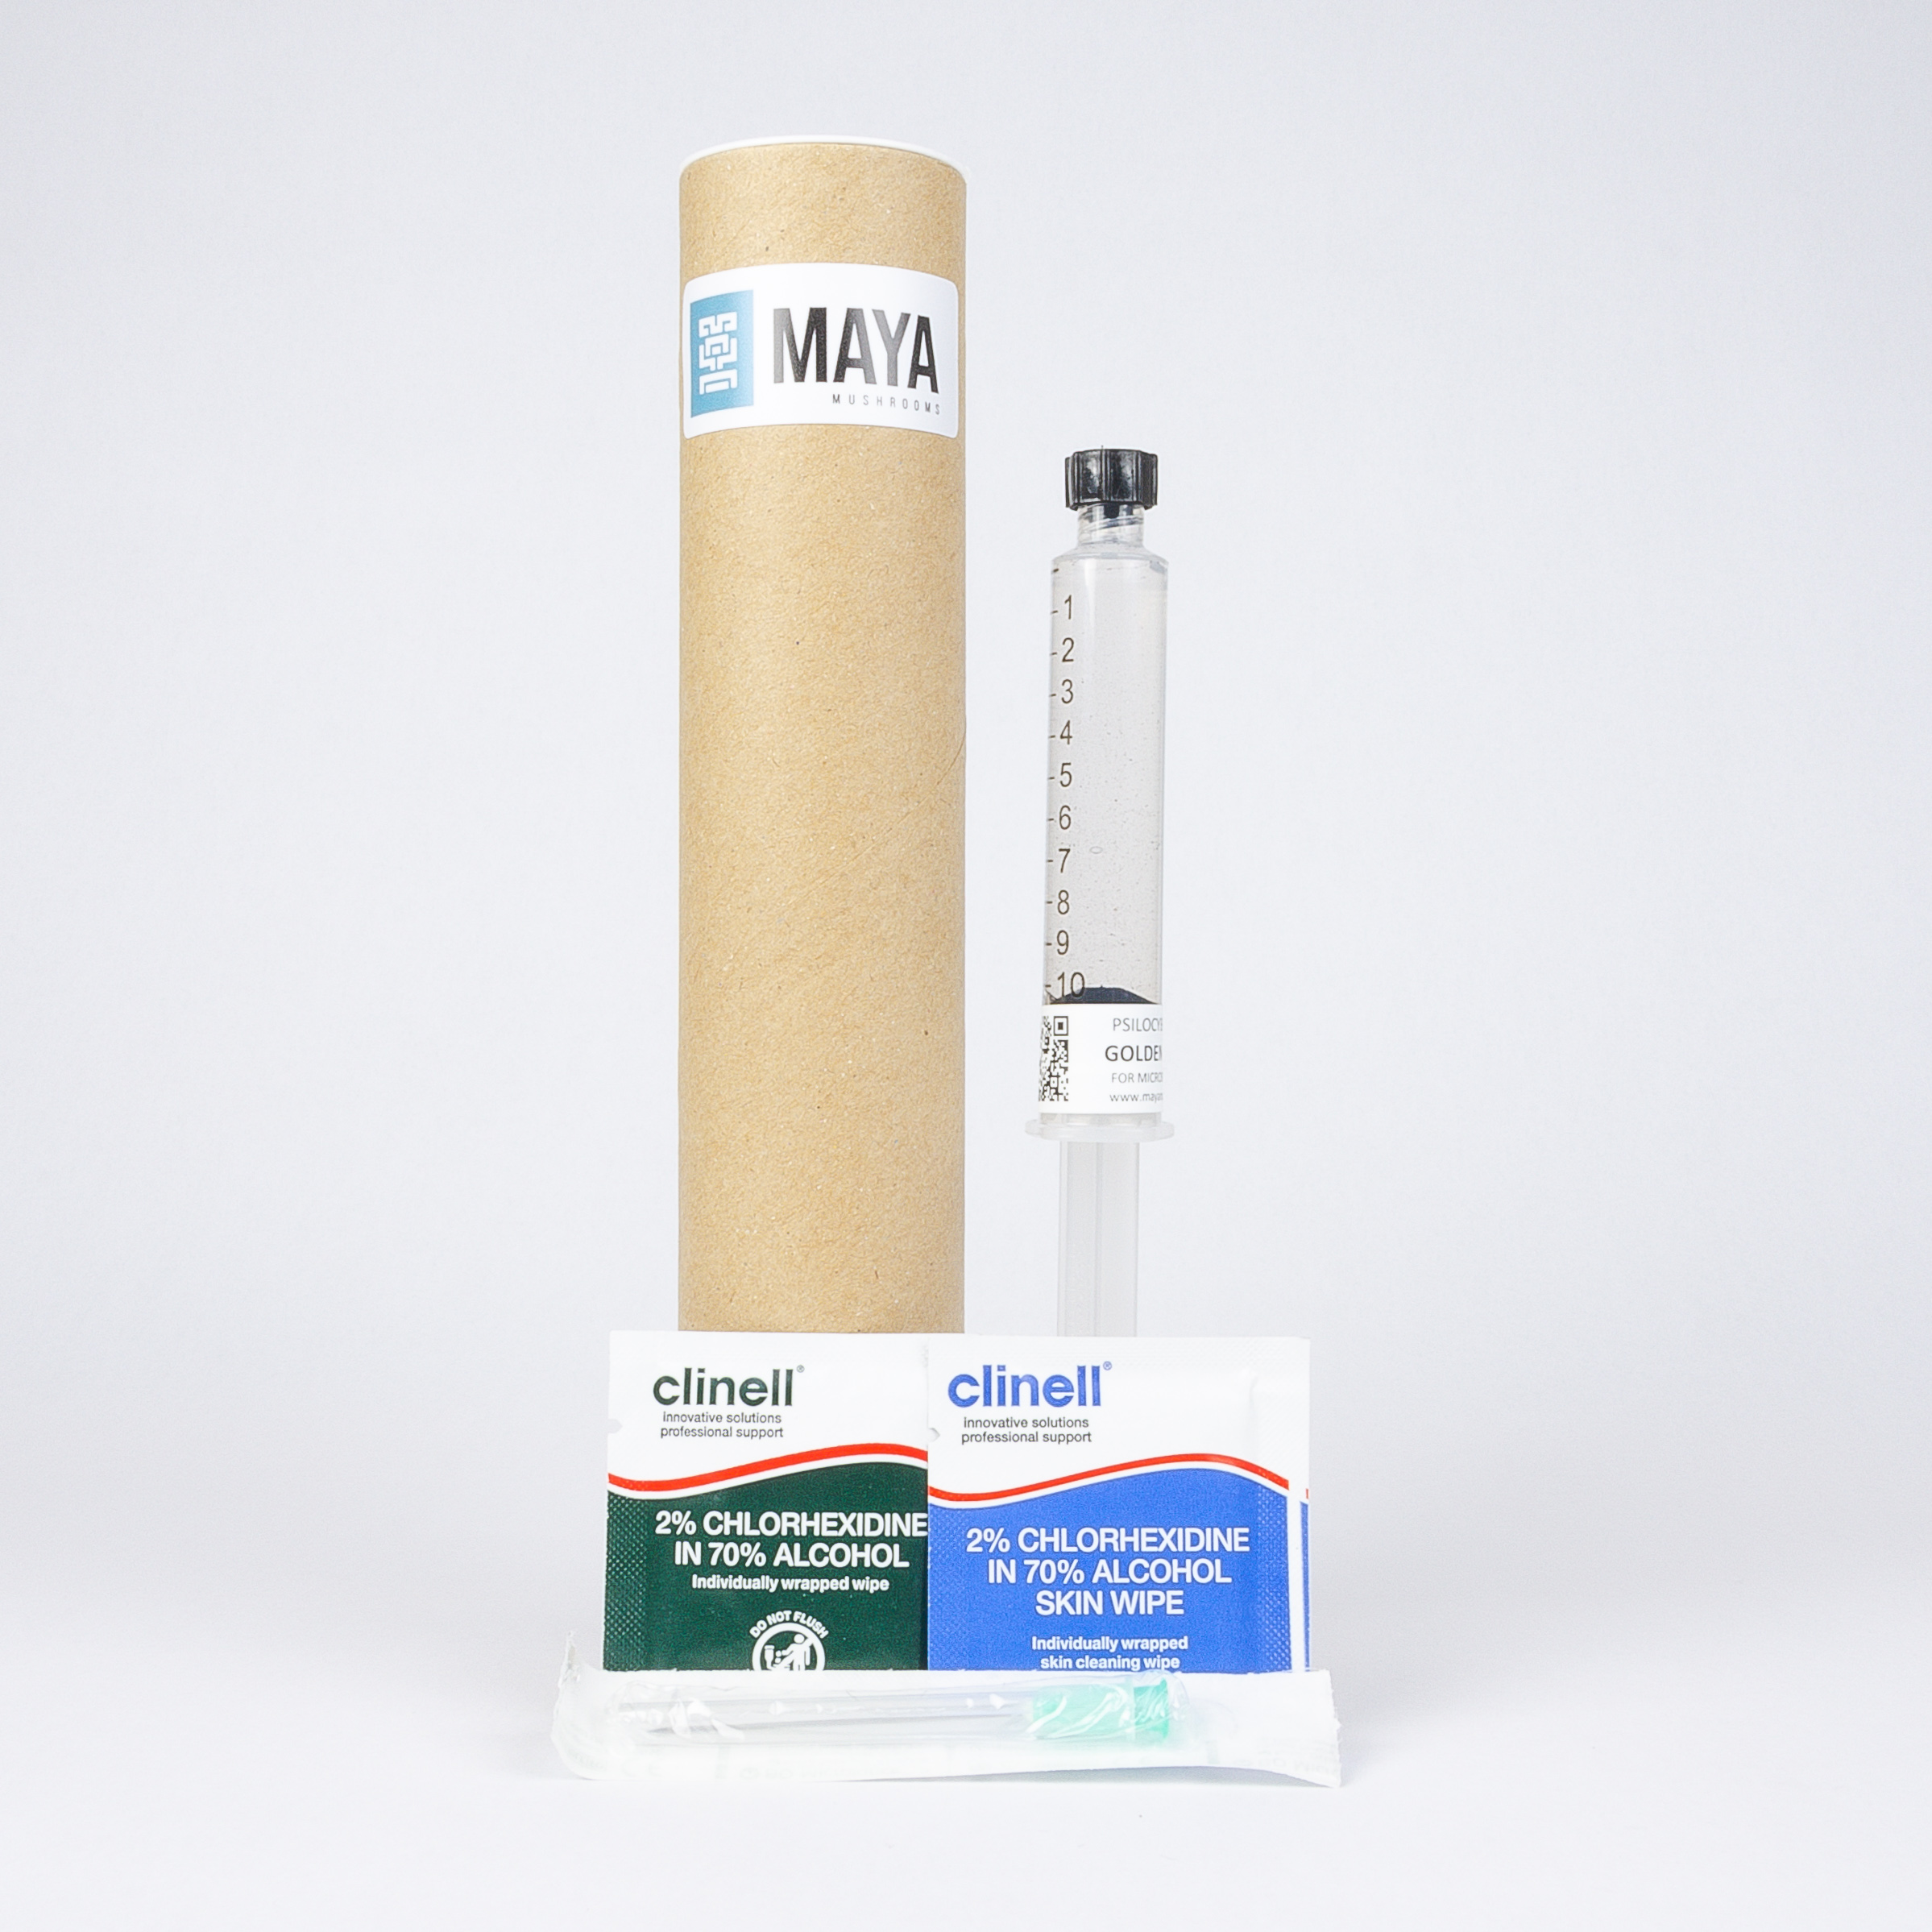 Mushroom Spore Syringe in Packaging Tube, Alcohol Wipes and Needles